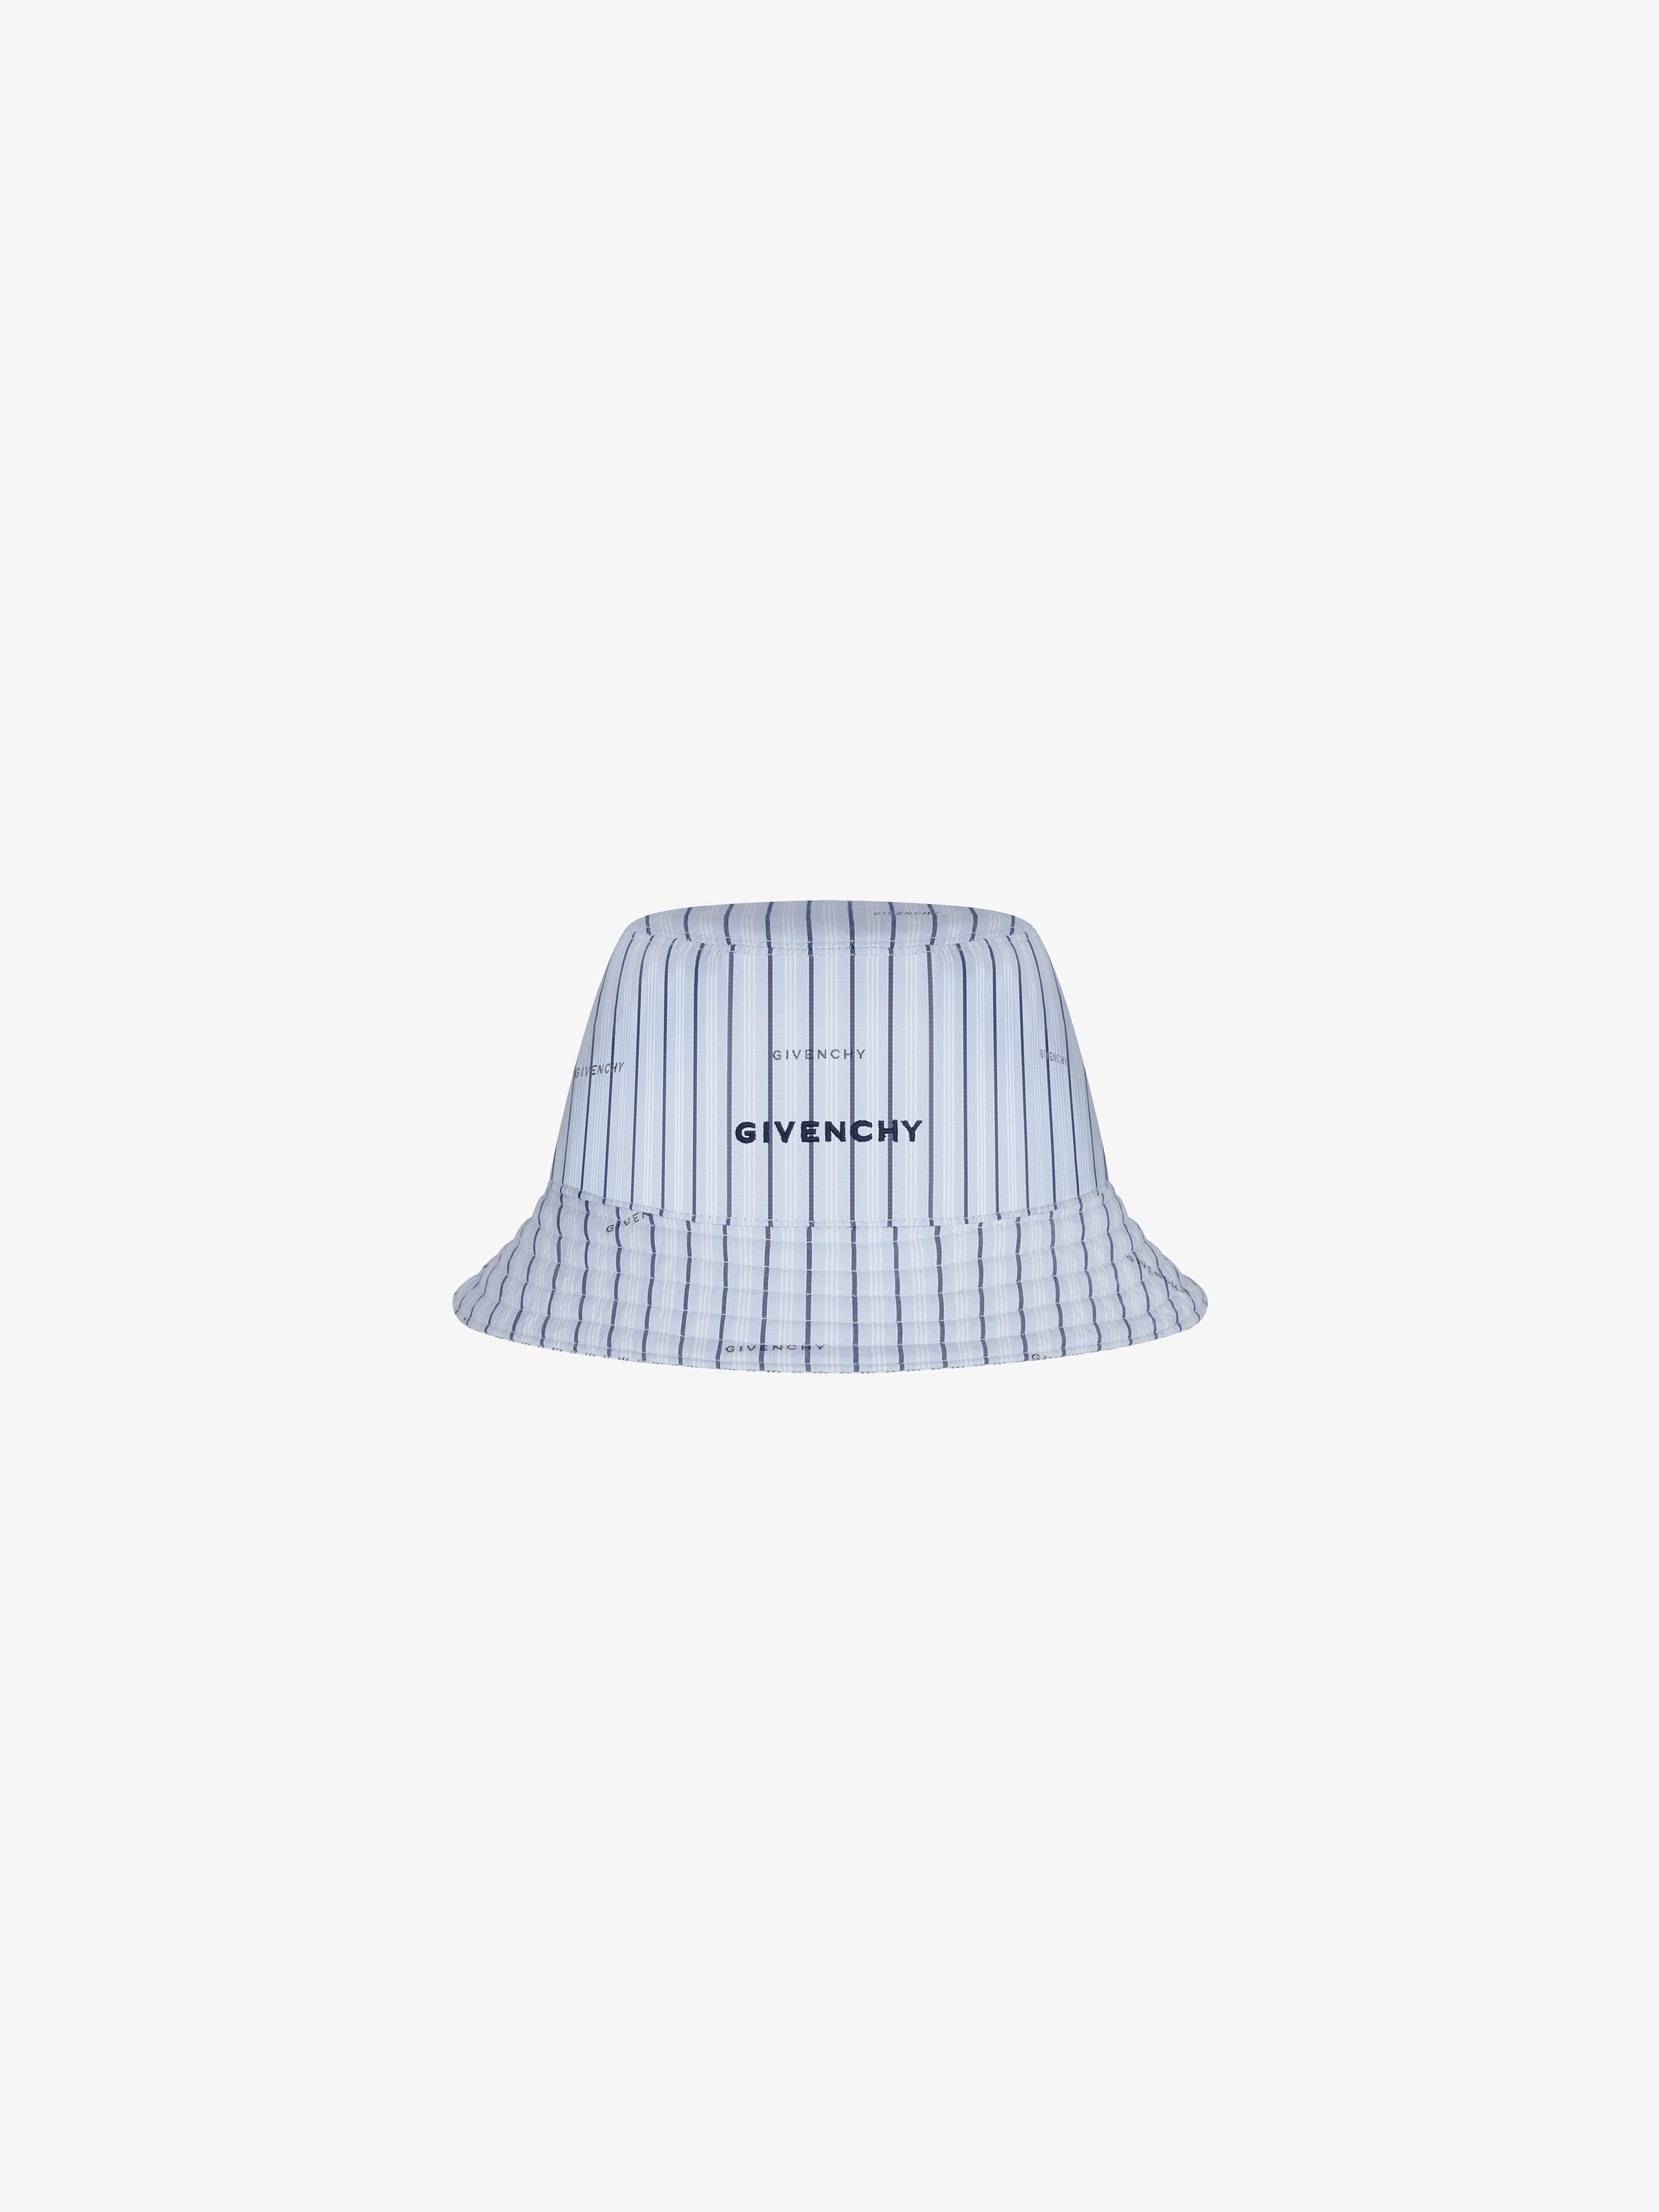 REVERSIBLE GIVENCHY BUCKET HAT - 1